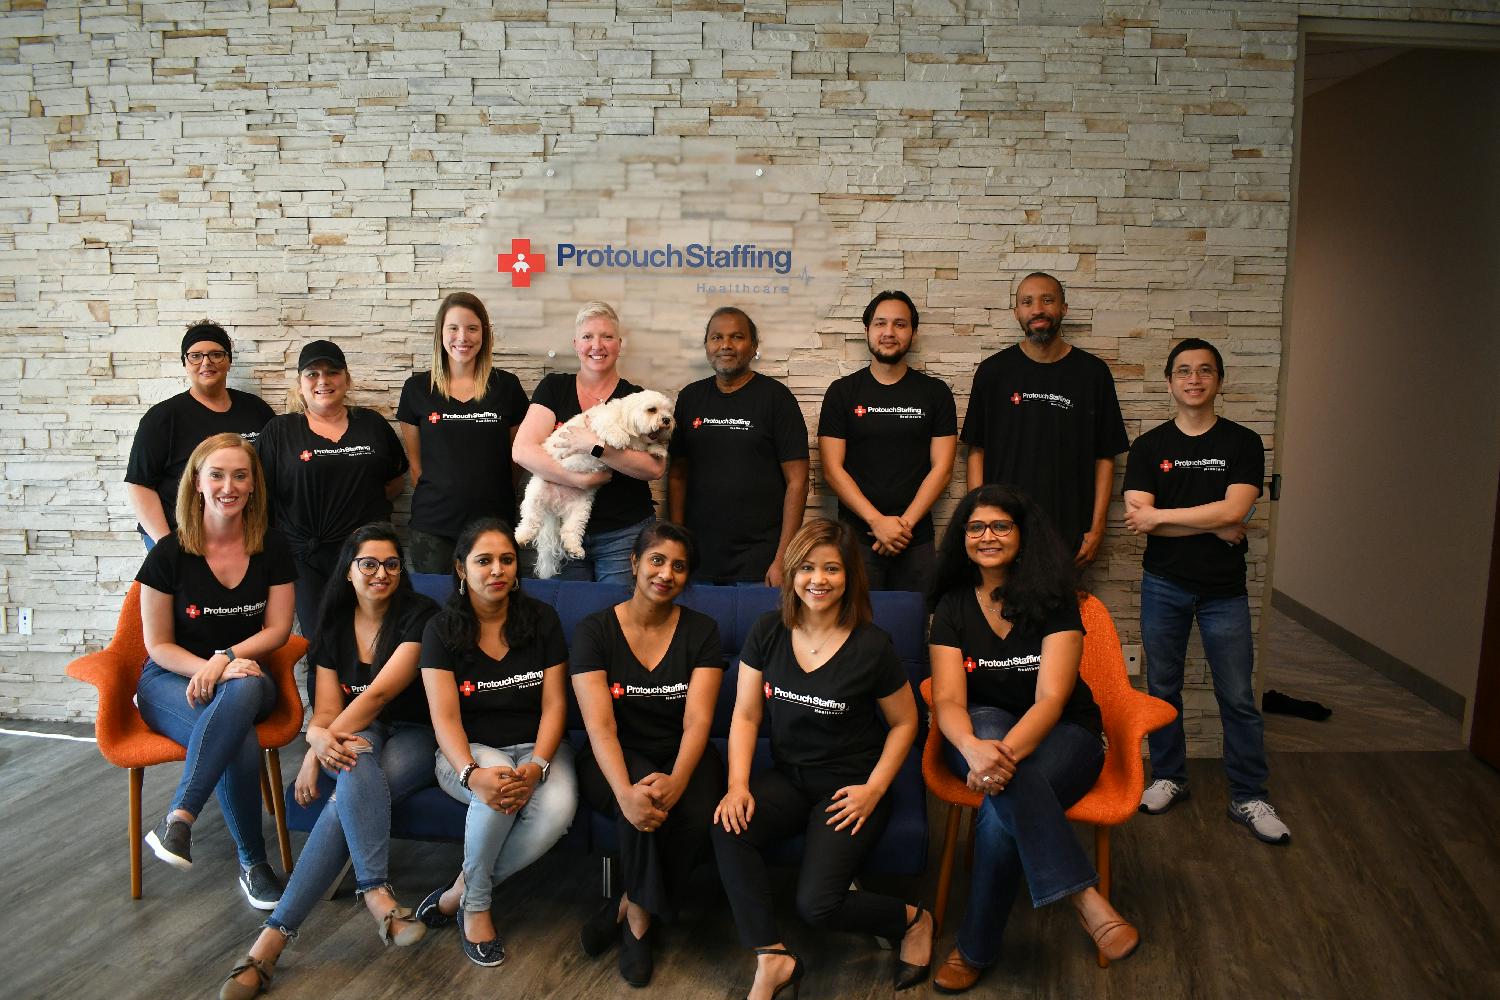 The Protouch Staffing Team: September 2020